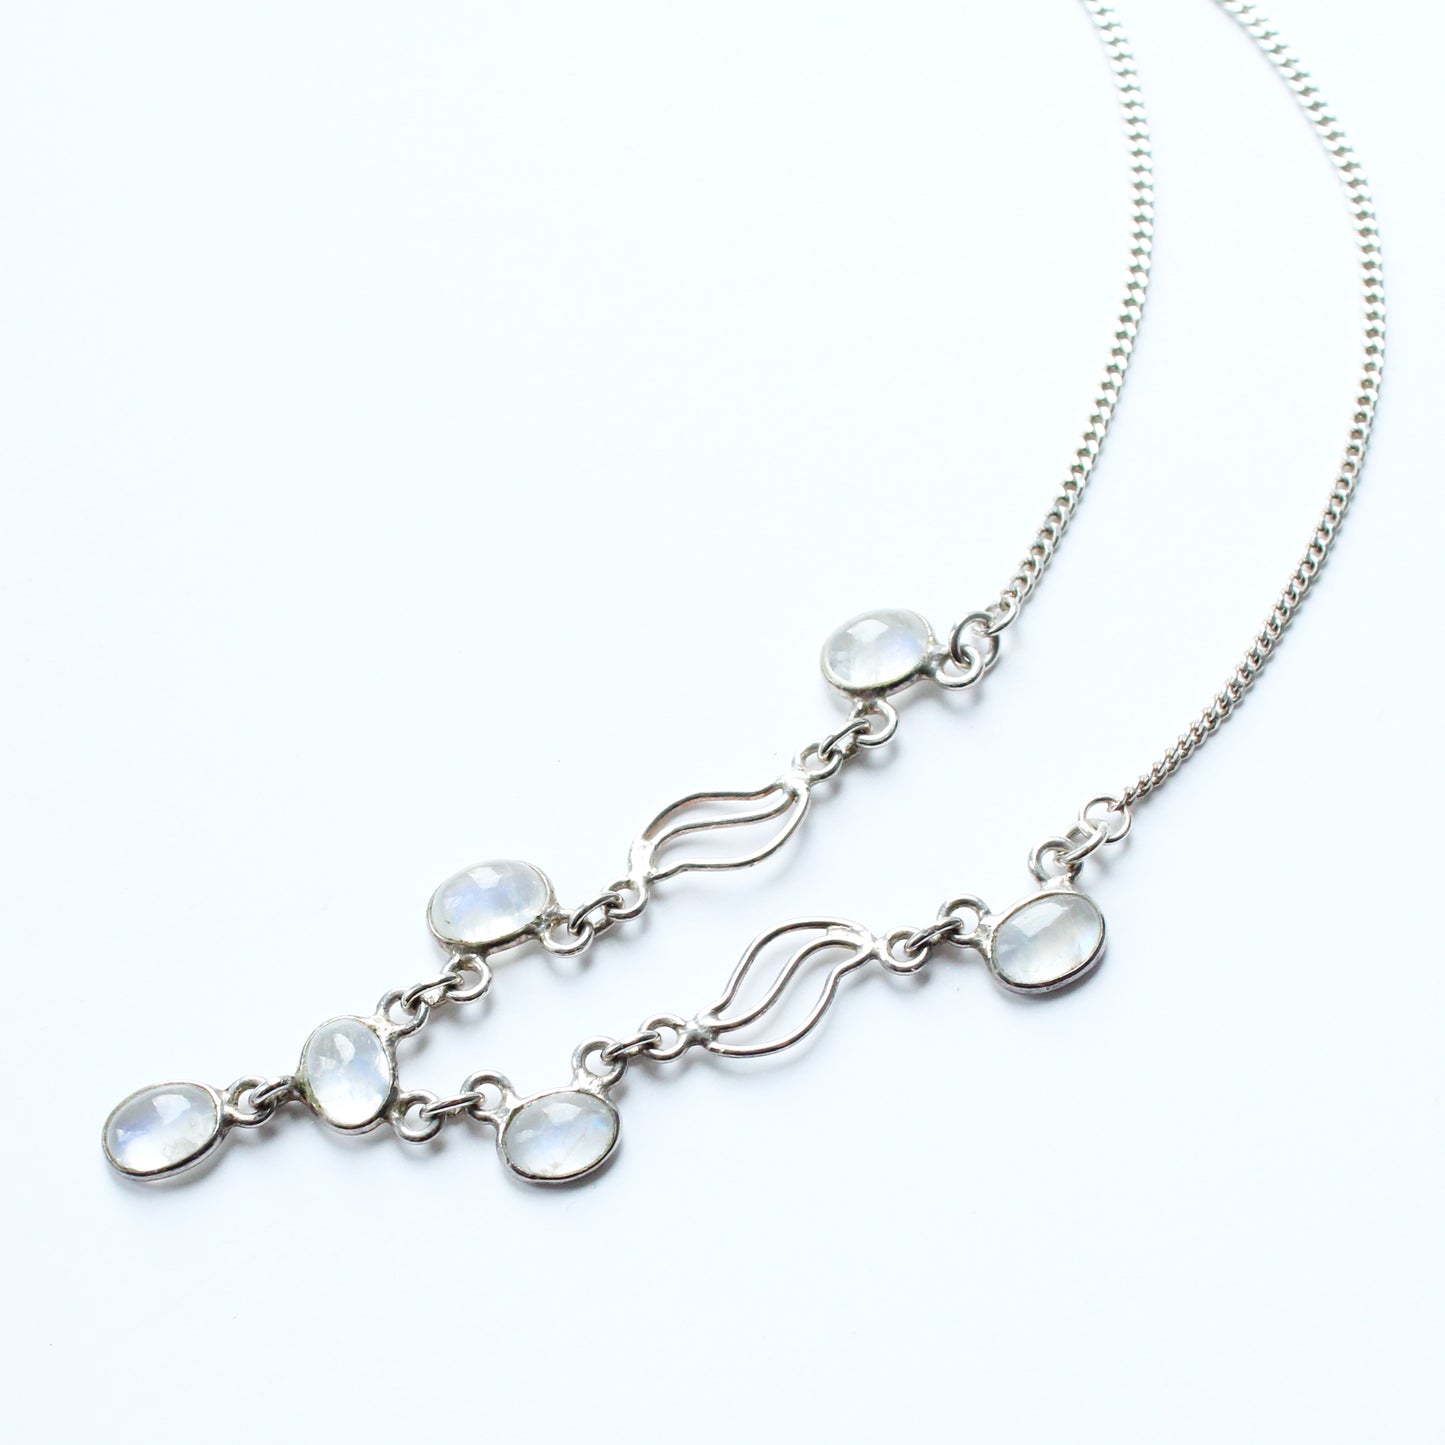 Solid Silver Moonstone Necklace